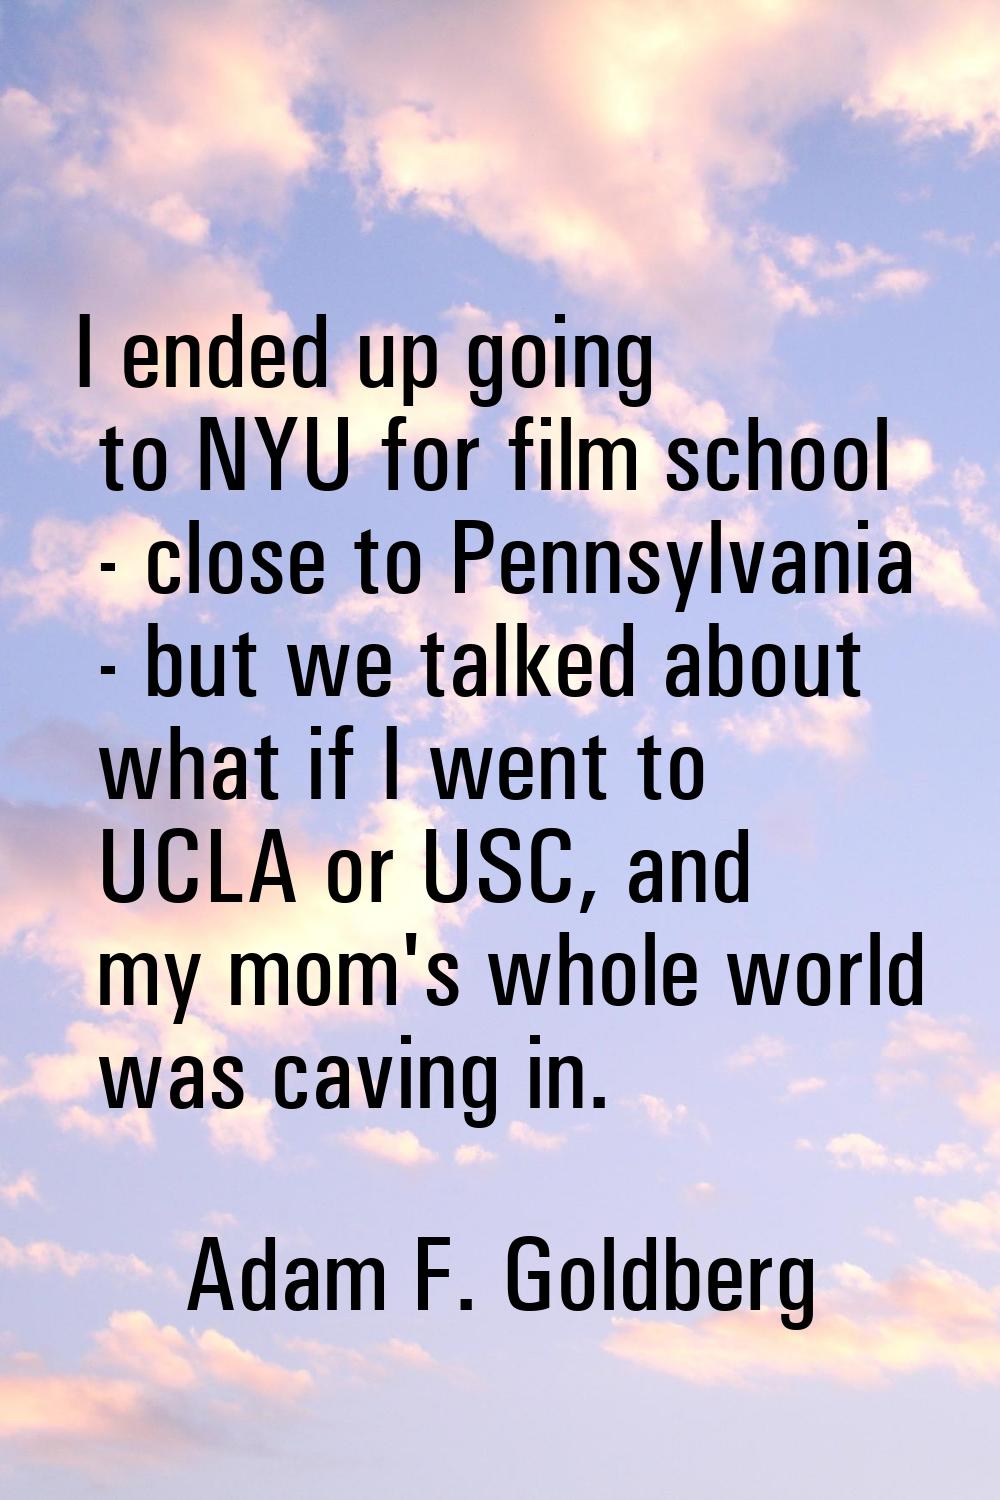 I ended up going to NYU for film school - close to Pennsylvania - but we talked about what if I wen